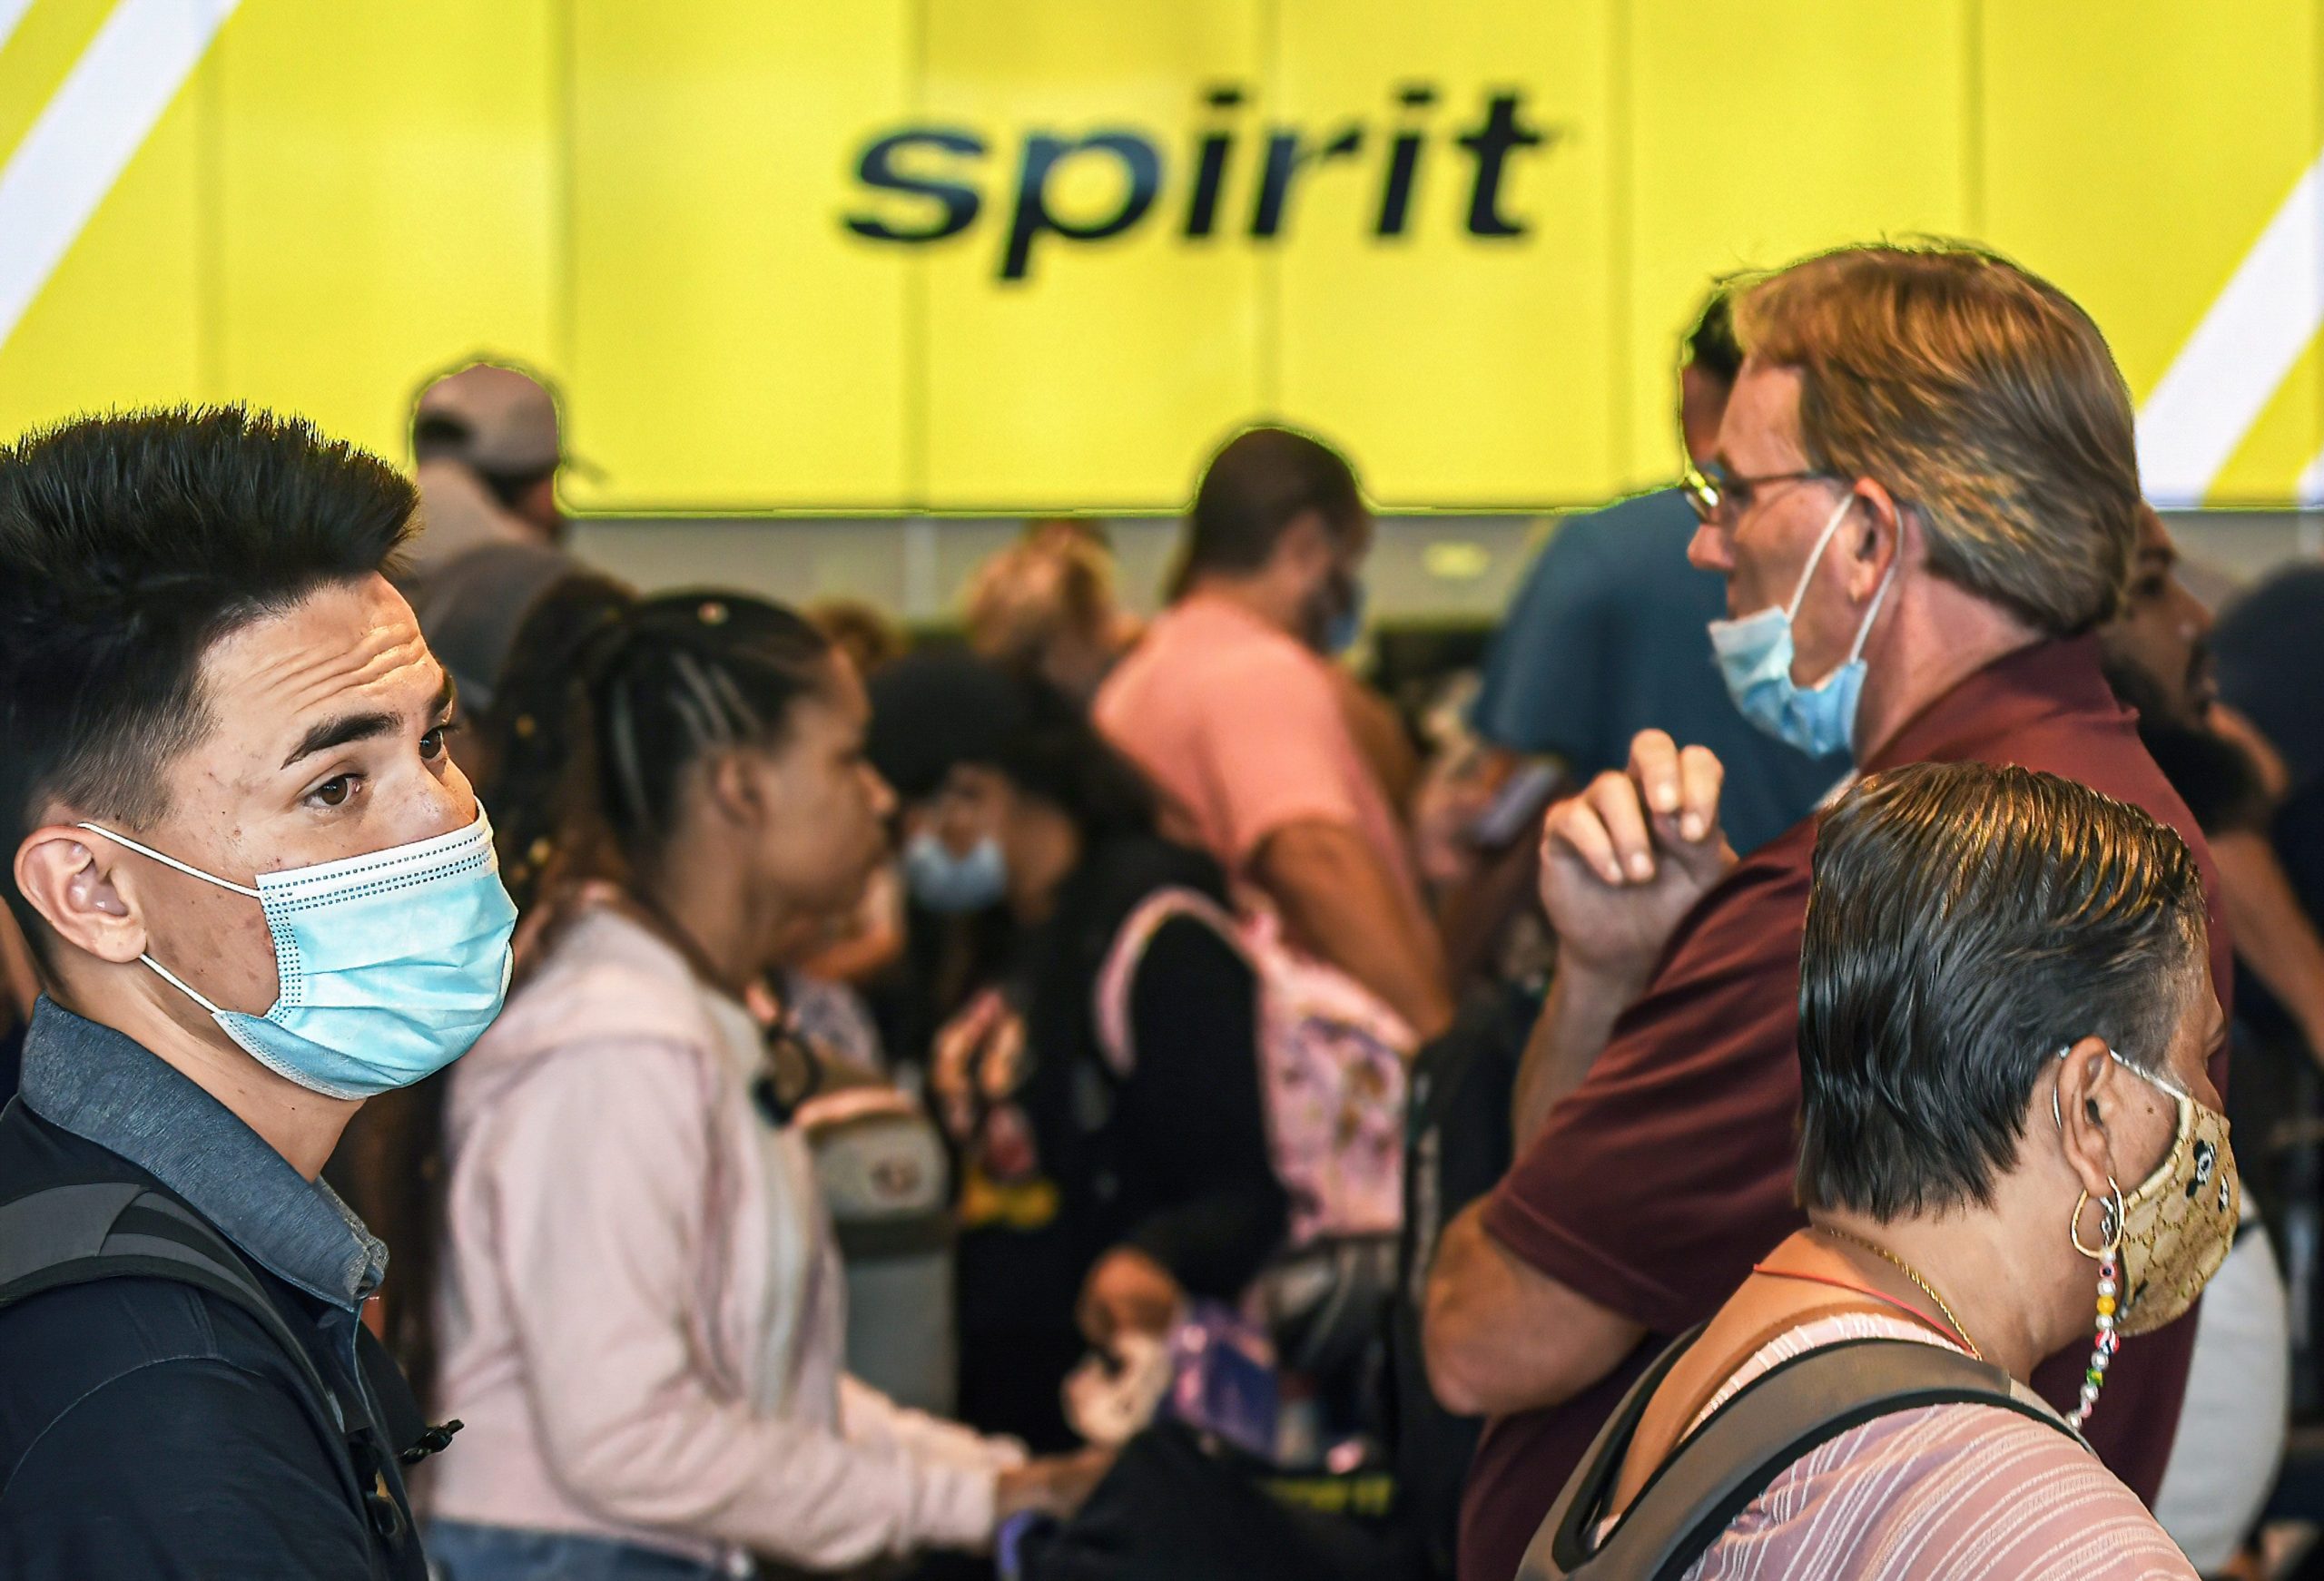 Passengers wait in line at the Spirit Airlines check-in counter at Orlando International Airport on the sixth day the airline has cancelled hundreds of flights.